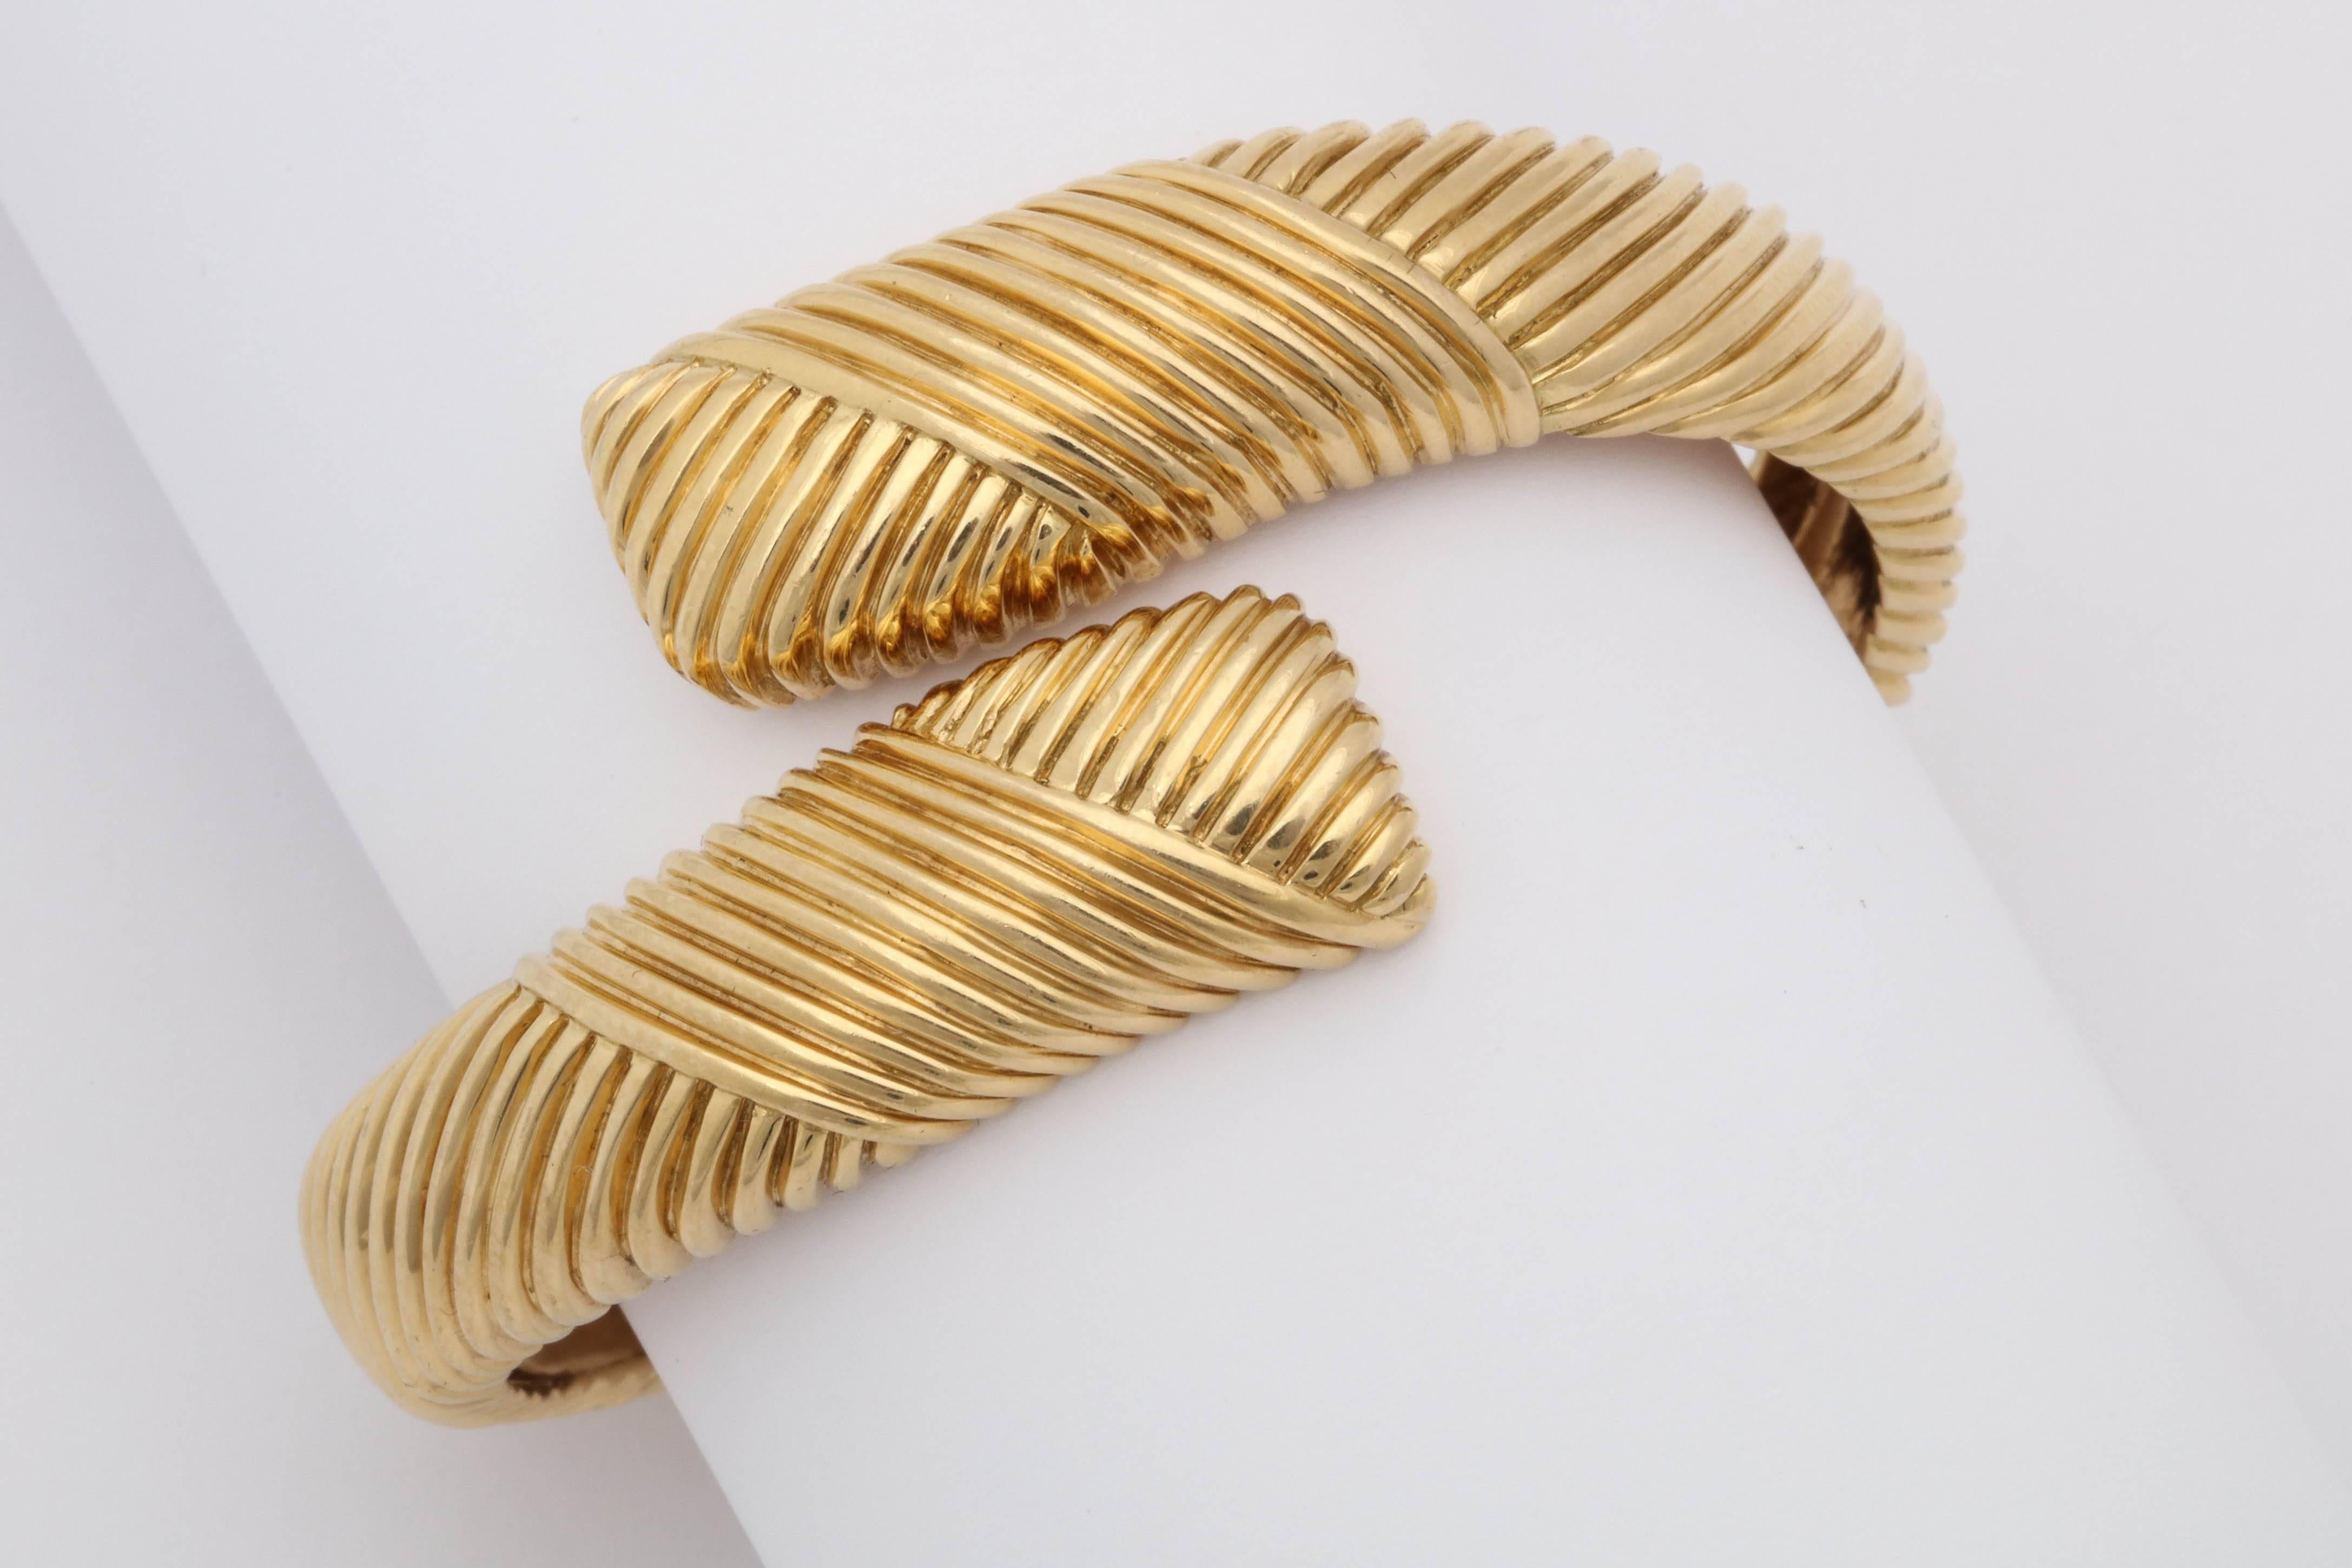 One Ladies 18kt Yellow Gold Crossover Hinged Bangle Bracelet Designed With A Diagonal Textured Ridged Pattern.One Size Fits Al,l Designed By Tiffany & Co. In The 1960's.